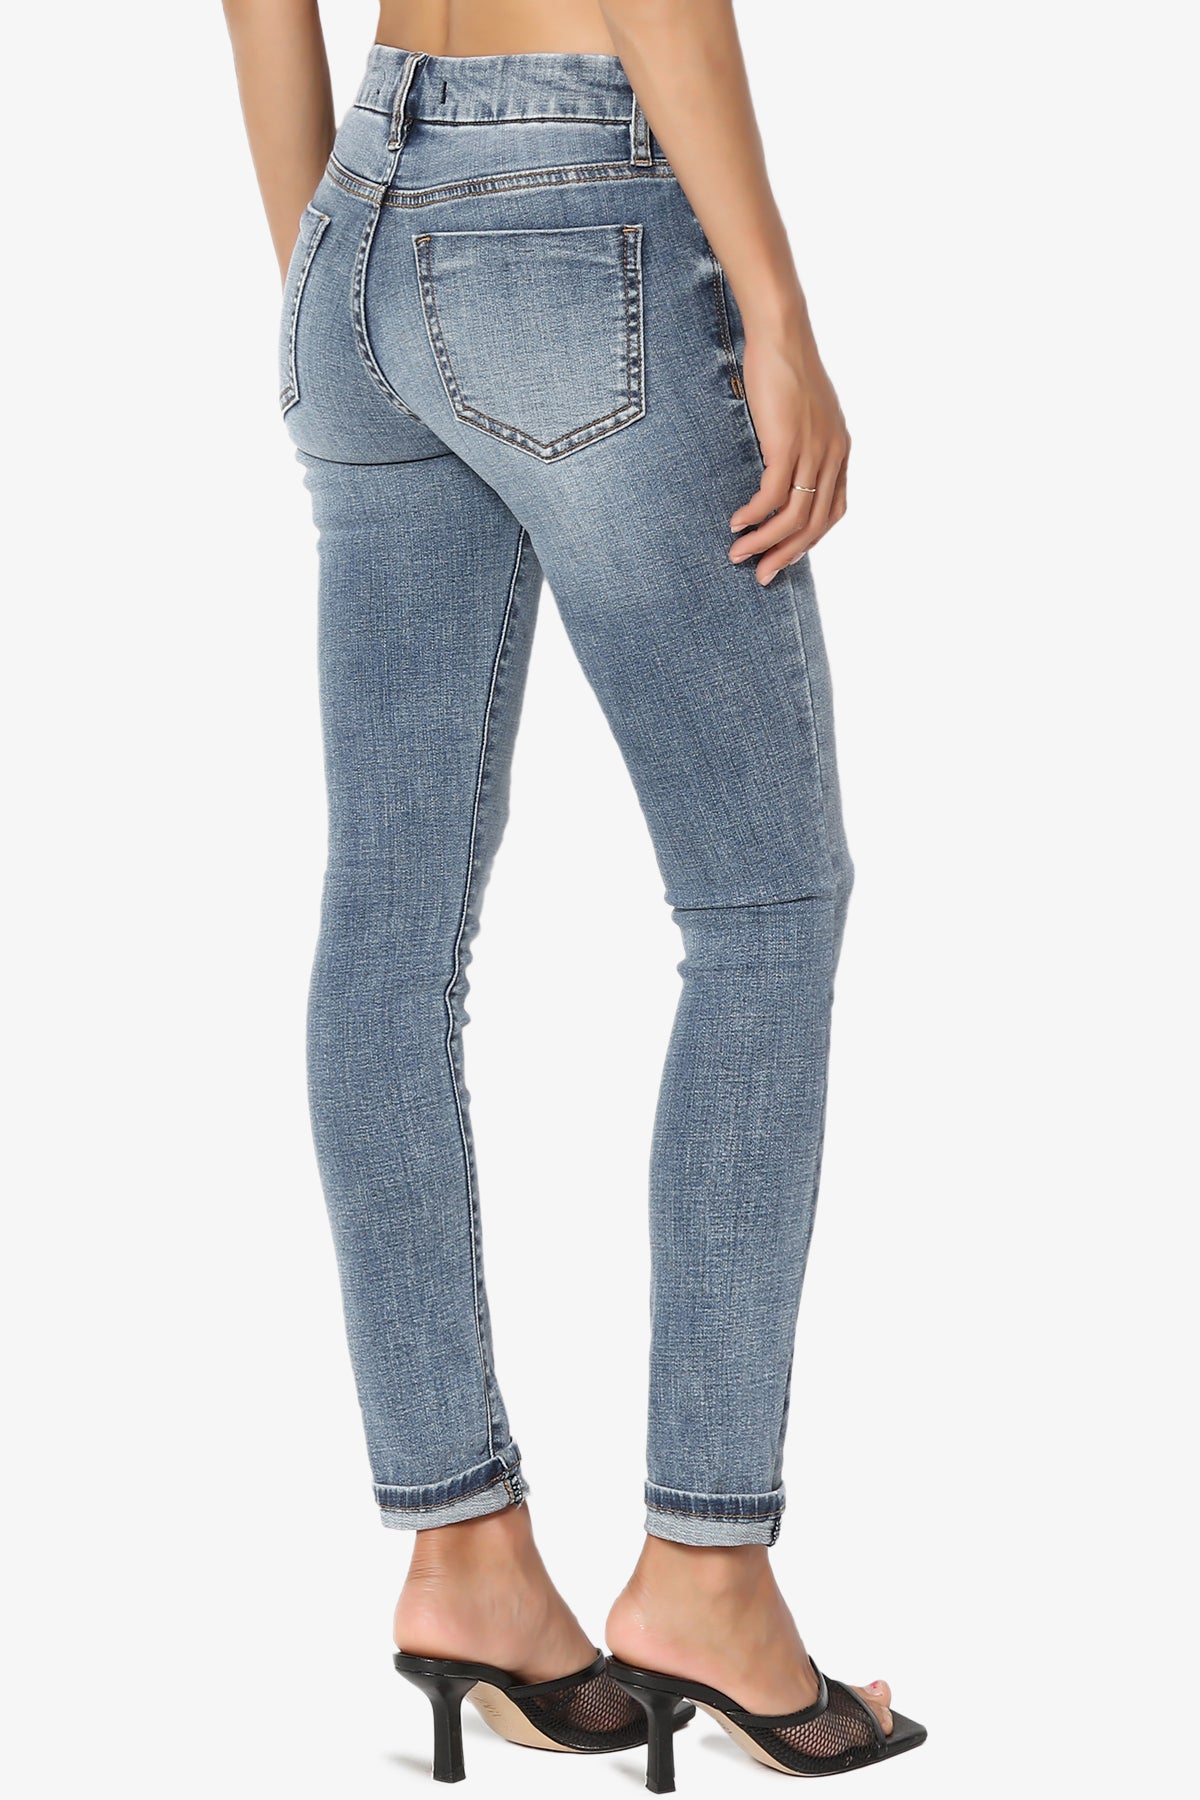 Load image into Gallery viewer, Greta Roll Up Skinny Jeans in Medium
